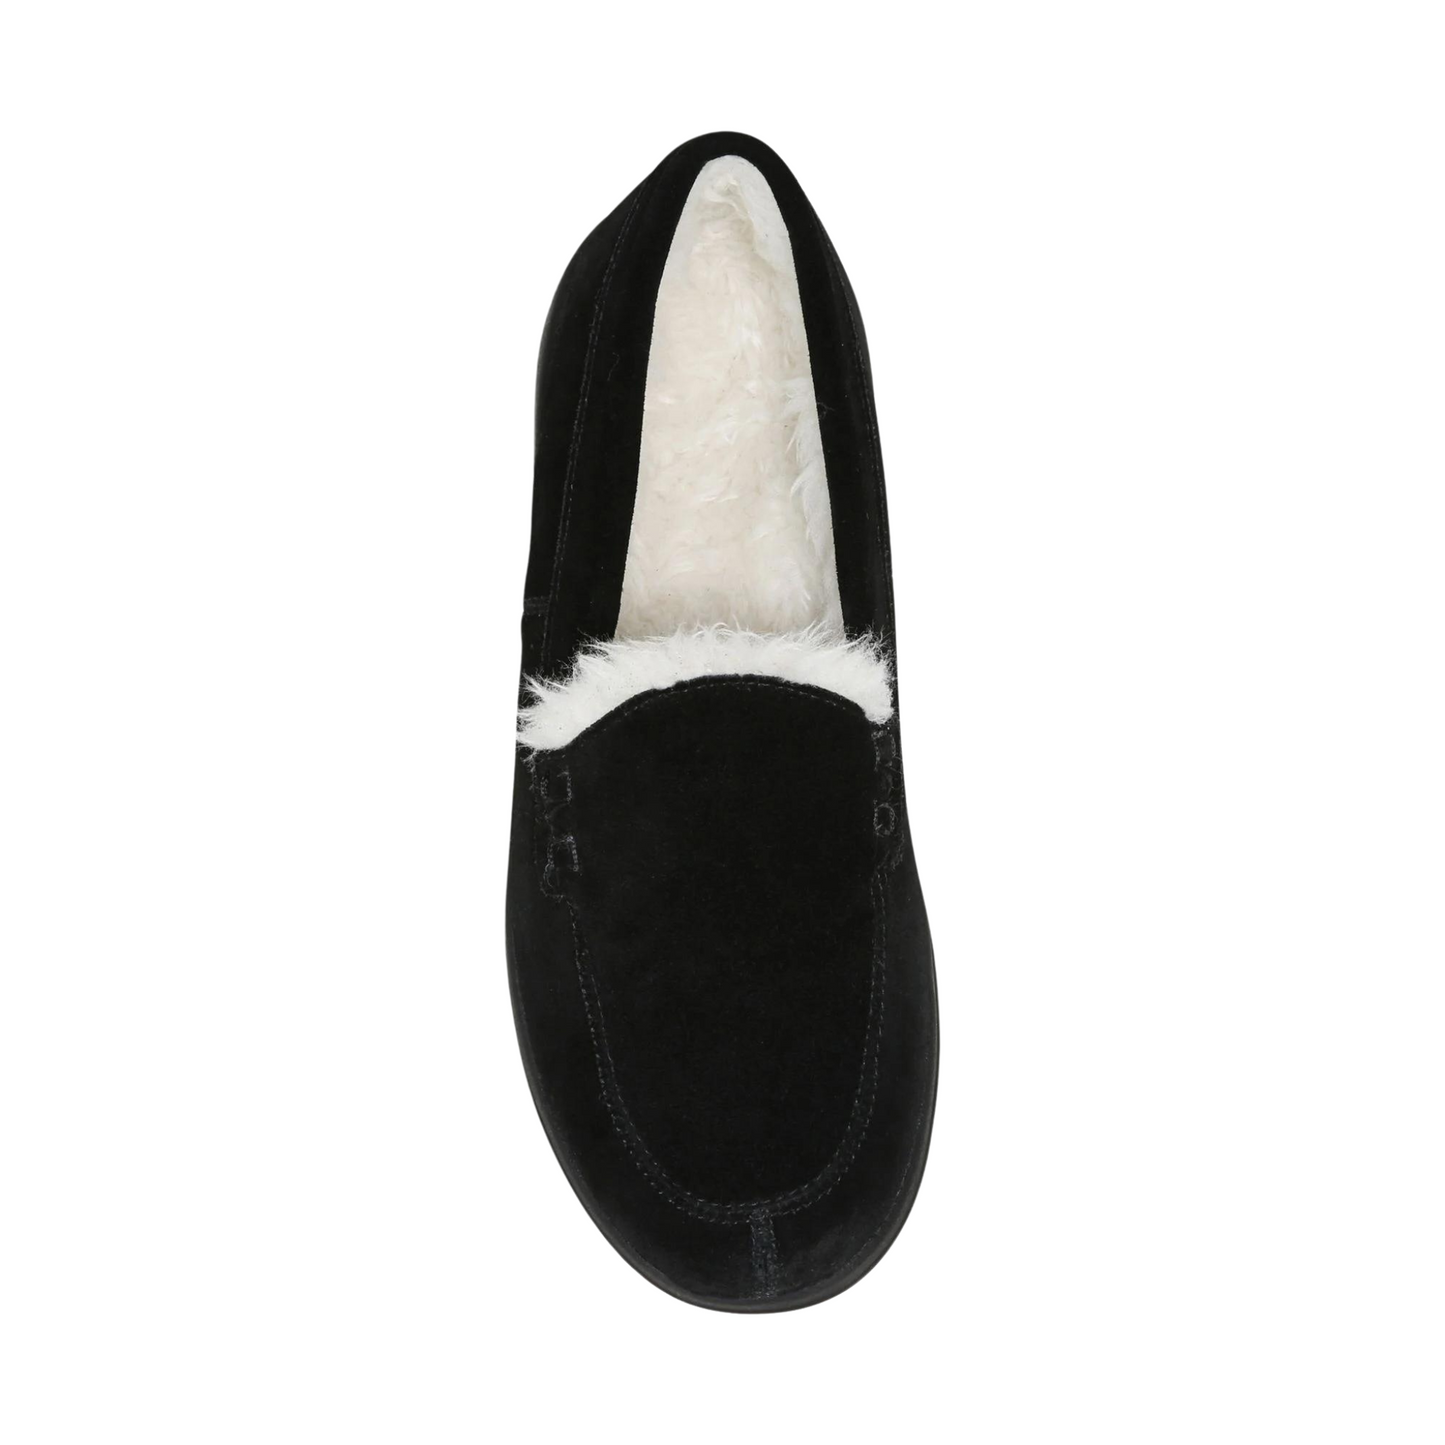 A top view of a black suede slipper with a plush white interior.